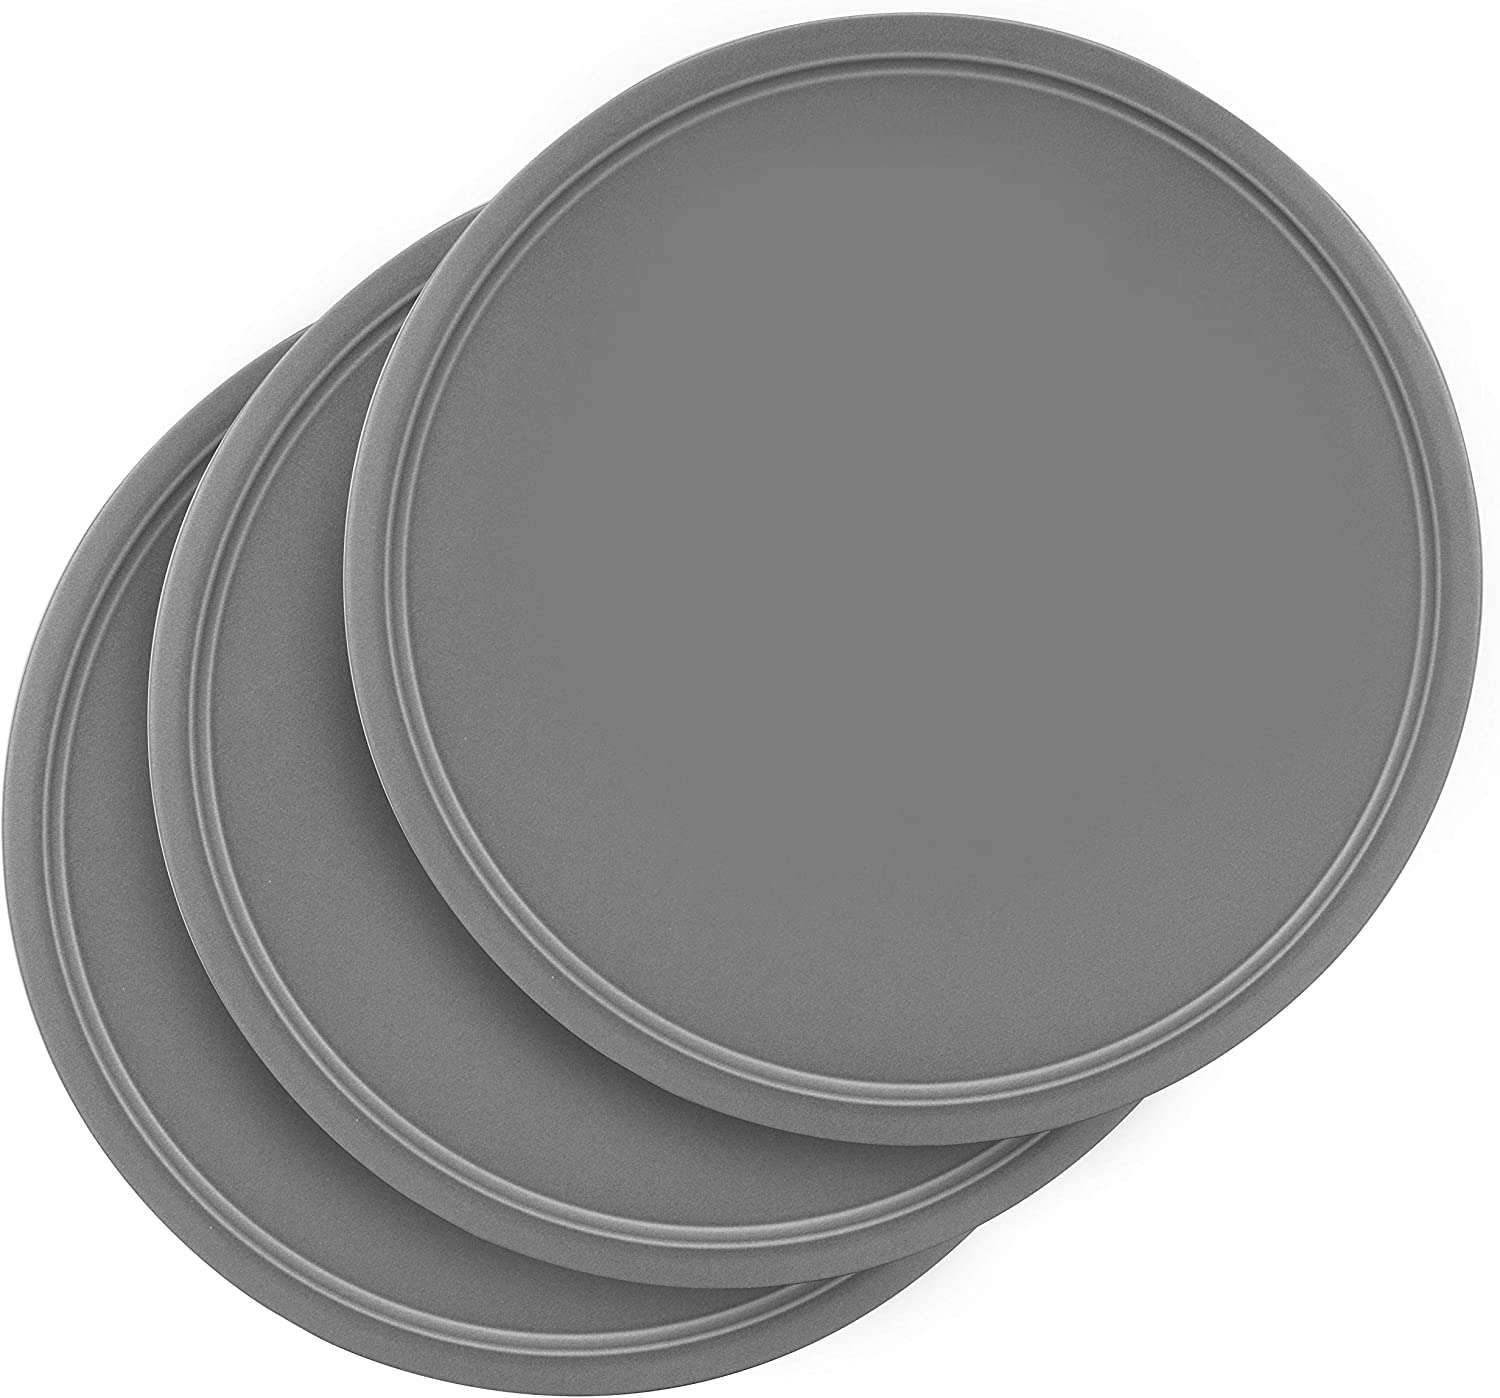 G & S Metal Products Company Pizza Pan